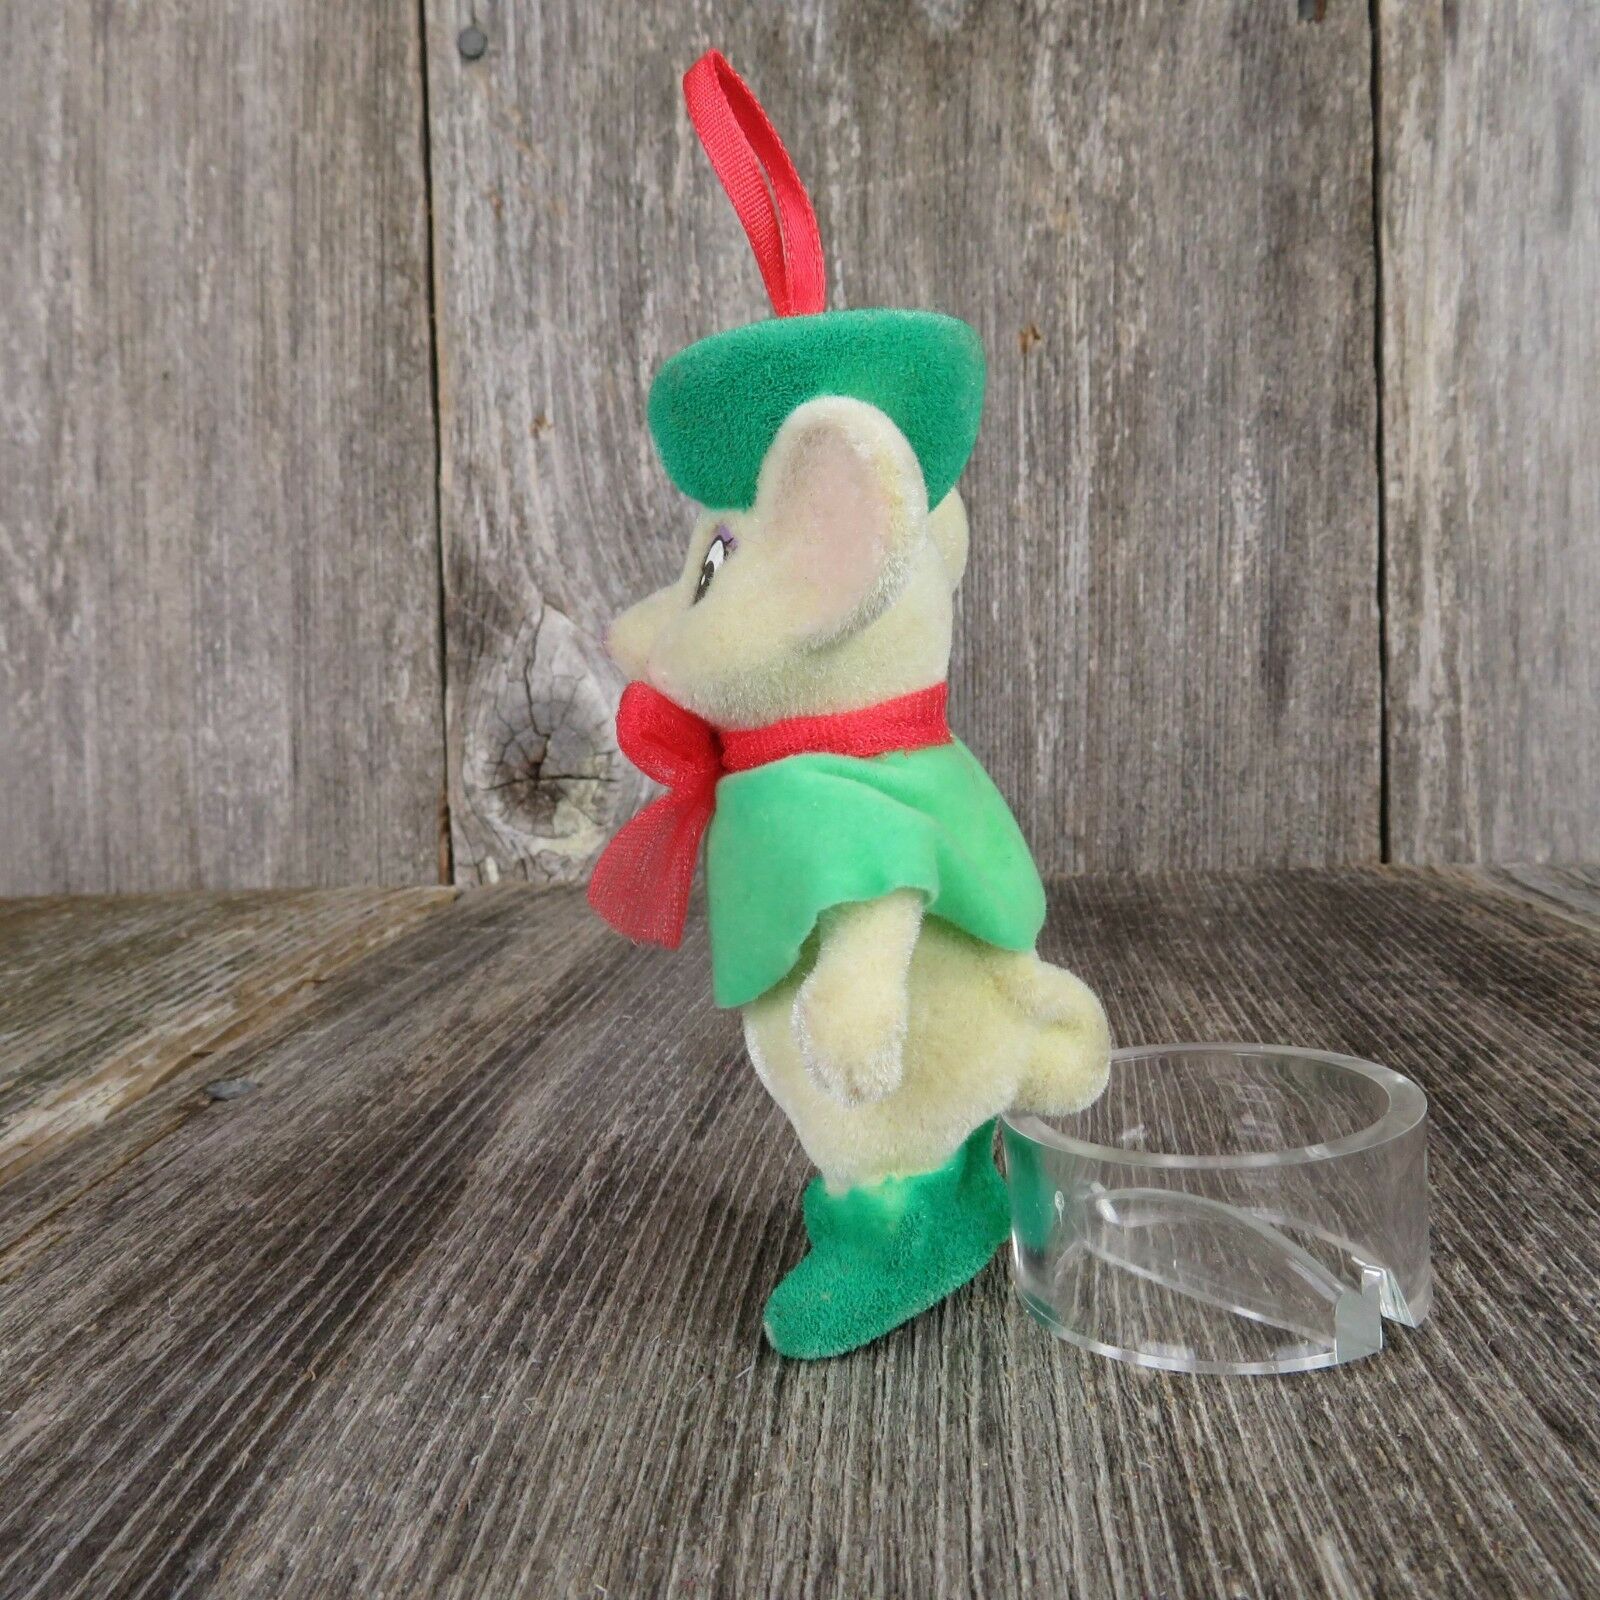 Vintage Mouse Ornament Rescuers Disney Miss Bianca Christmas Flocked Girl - At Grandma's Table